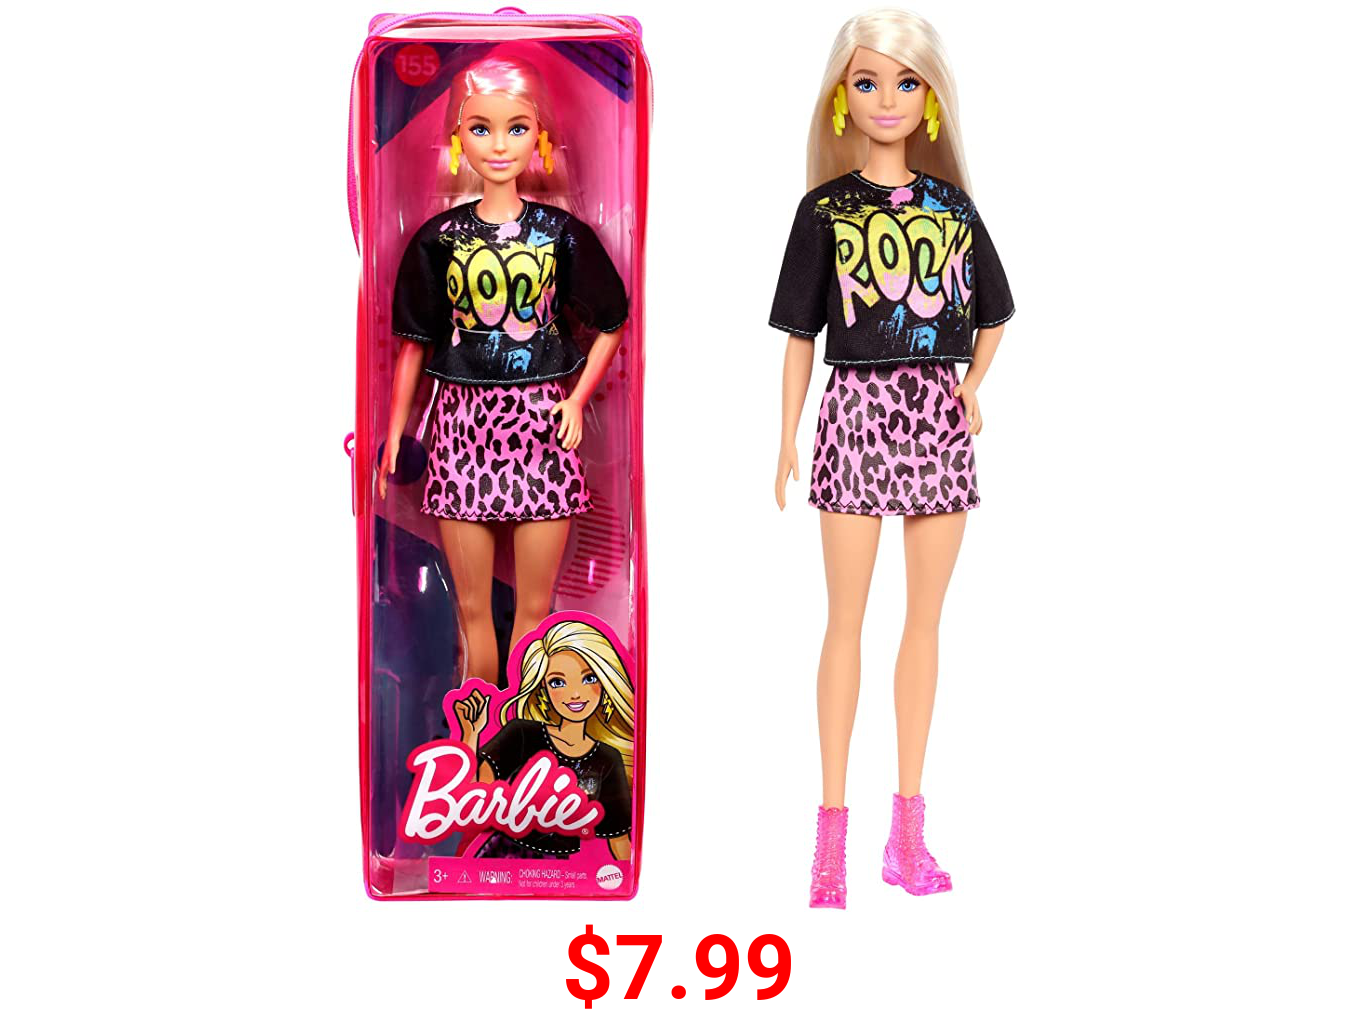 Barbie Fashionistas Doll #155 with Long Blonde Hair Wearing “Rock” Graphic T-Shirt, Animal-Print Skirt, Pink Booties & Earrings, Toy for Kids 3 to 8 Years Old , Black